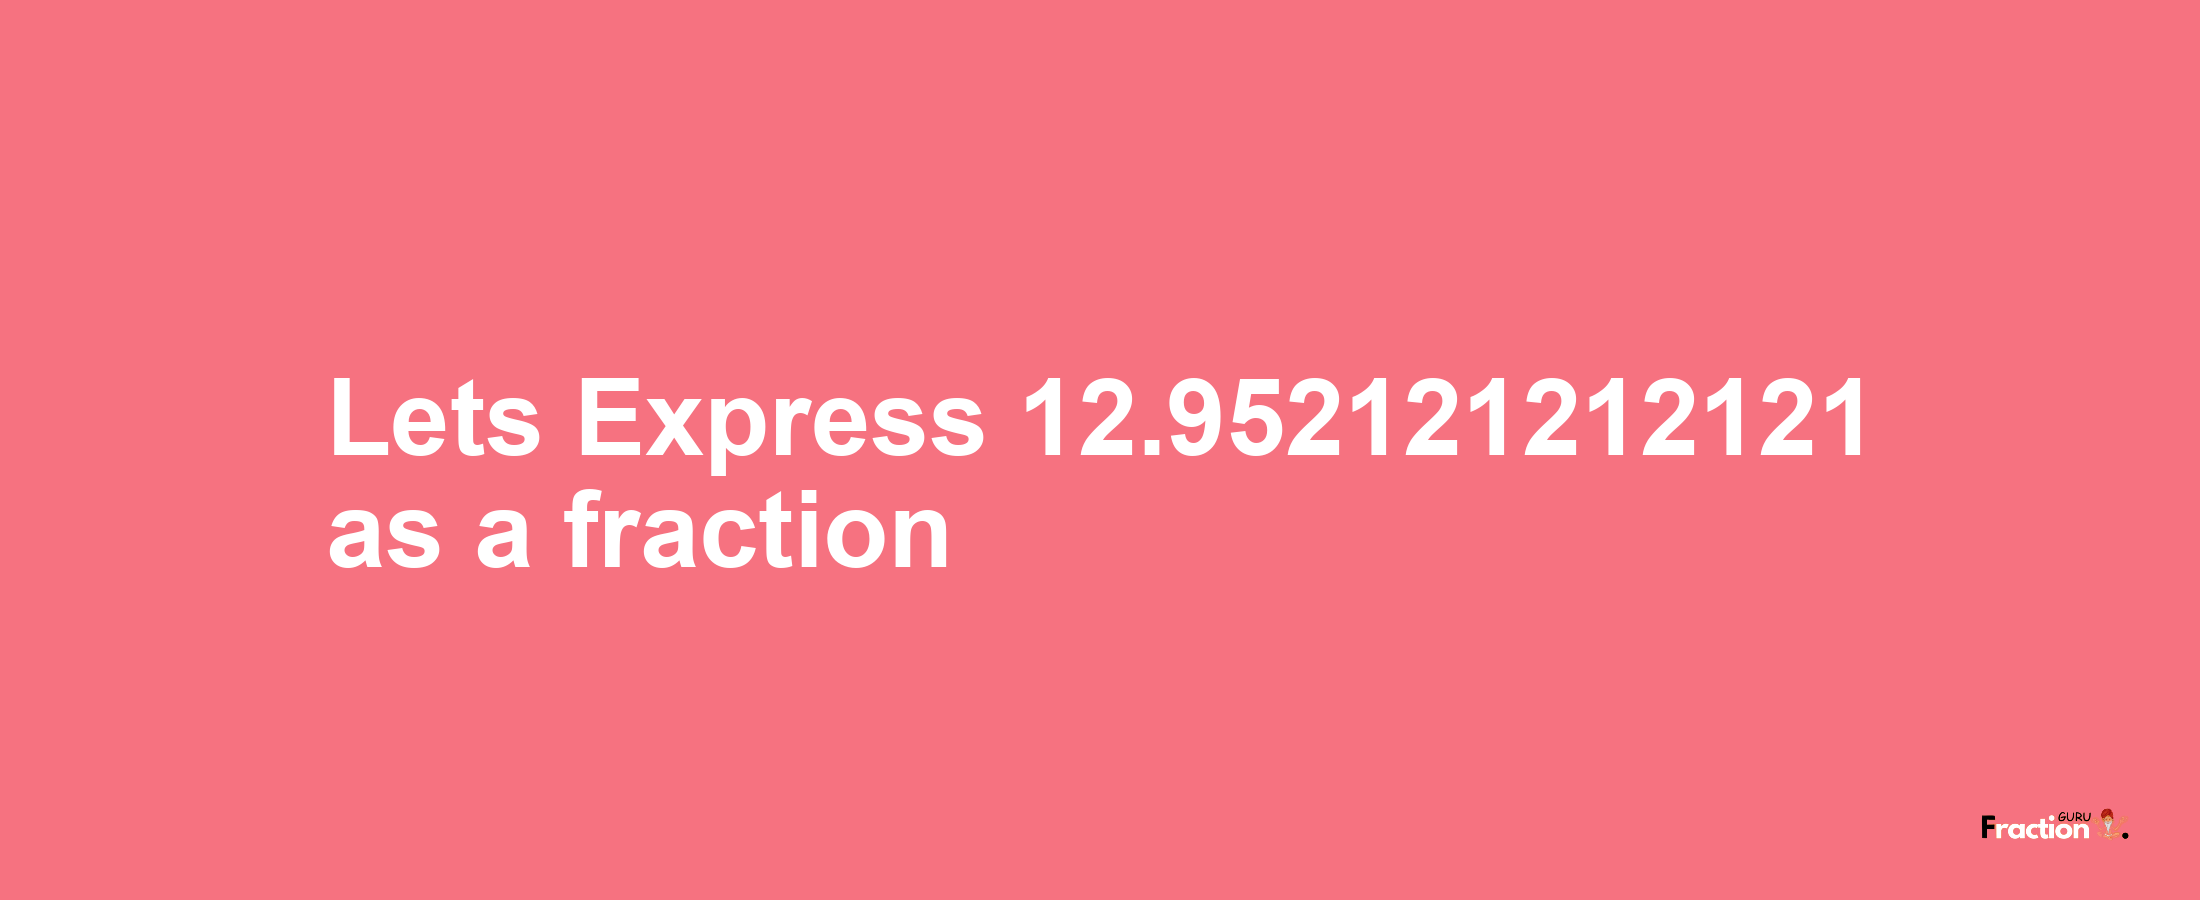 Lets Express 12.952121212121 as afraction